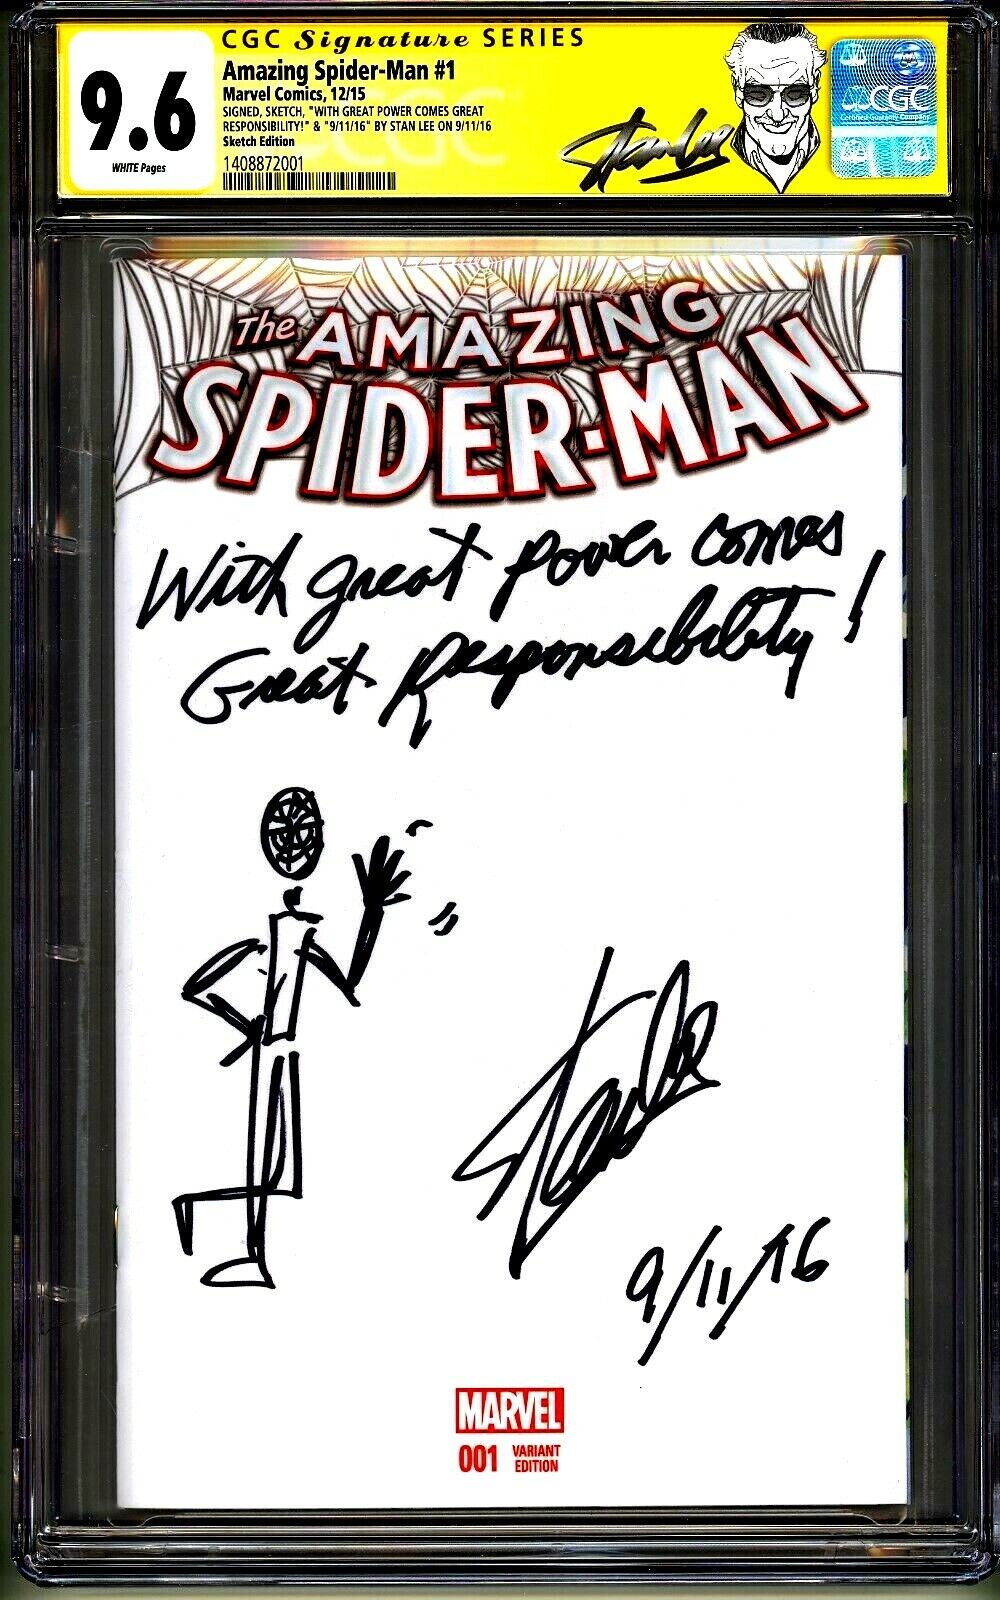 💥AMAZING SPIDER-MAN #1 CGC SS 9.6 STAN LEE SIGNED SKETCH DATE QUOTE COMMENT 1/1